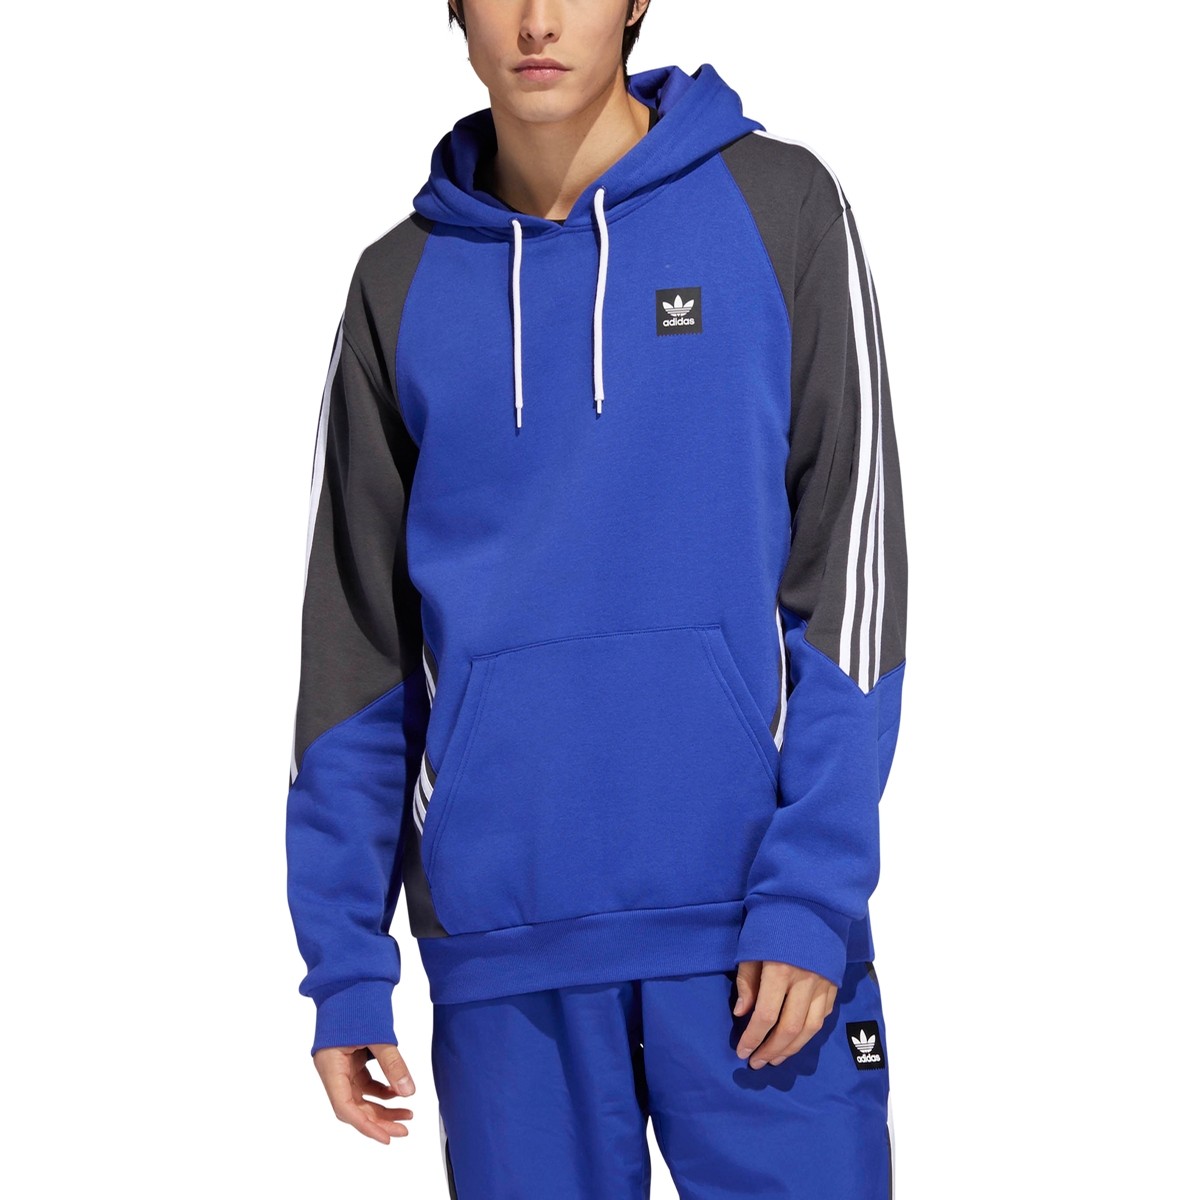 Adidas INSLEY HOODIE (ACTIVE BLUE/SOLID 